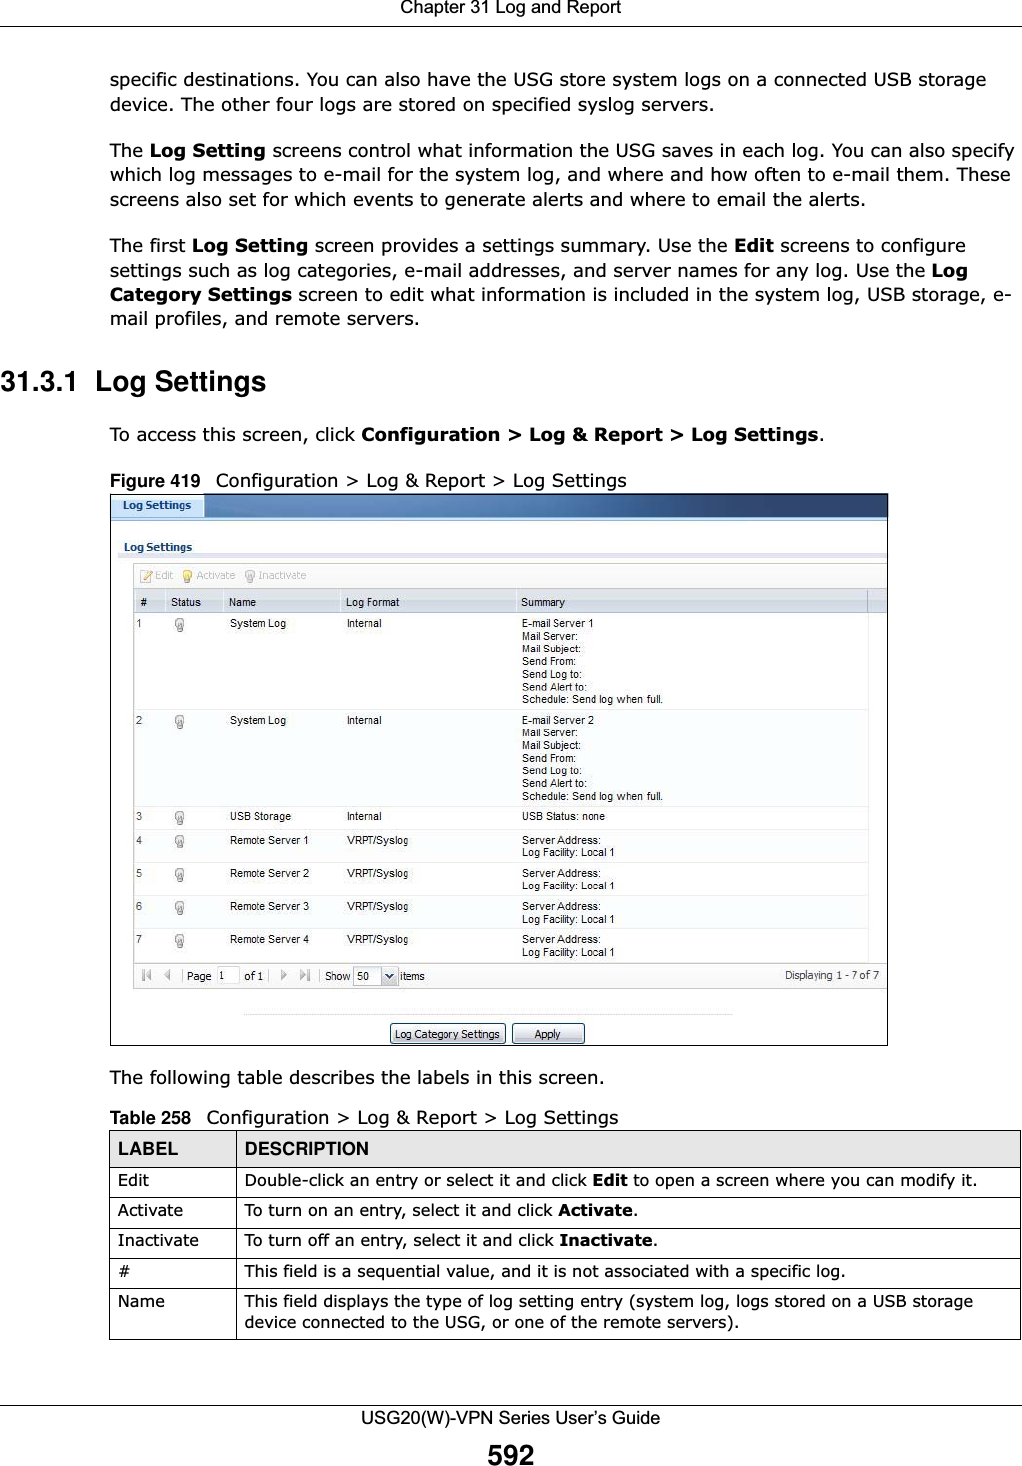 Chapter 31 Log and ReportUSG20(W)-VPN Series User’s Guide592specific destinations. You can also have the USG store system logs on a connected USB storage device. The other four logs are stored on specified syslog servers.The Log Setting screens control what information the USG saves in each log. You can also specify which log messages to e-mail for the system log, and where and how often to e-mail them. These screens also set for which events to generate alerts and where to email the alerts.The first Log Setting screen provides a settings summary. Use the Edit screens to configure settings such as log categories, e-mail addresses, and server names for any log. Use the Log Category Settings screen to edit what information is included in the system log, USB storage, e-mail profiles, and remote servers.31.3.1  Log SettingsTo access this screen, click Configuration &gt; Log &amp; Report &gt; Log Settings.Figure 419   Configuration &gt; Log &amp; Report &gt; Log SettingsThe following table describes the labels in this screen. Table 258   Configuration &gt; Log &amp; Report &gt; Log SettingsLABEL DESCRIPTIONEdit Double-click an entry or select it and click Edit to open a screen where you can modify it. Activate To turn on an entry, select it and click Activate.Inactivate To turn off an entry, select it and click Inactivate.# This field is a sequential value, and it is not associated with a specific log.Name This field displays the type of log setting entry (system log, logs stored on a USB storage device connected to the USG, or one of the remote servers).